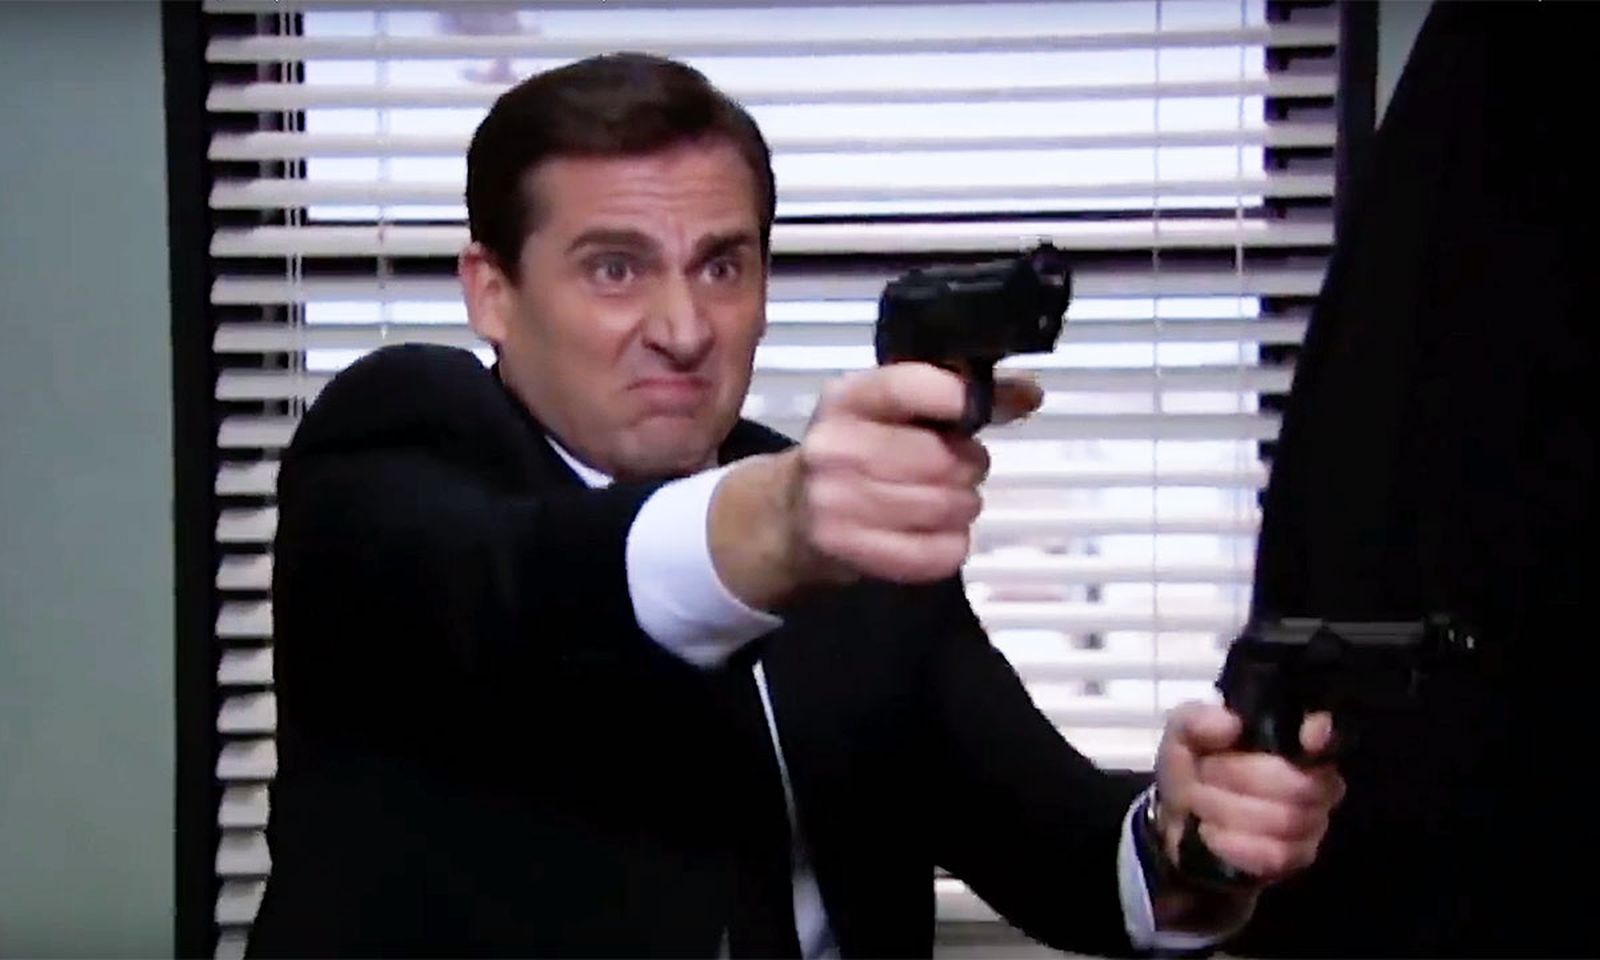 Steve Carrell in 'The Office' action film 'Threat Level Midnight'